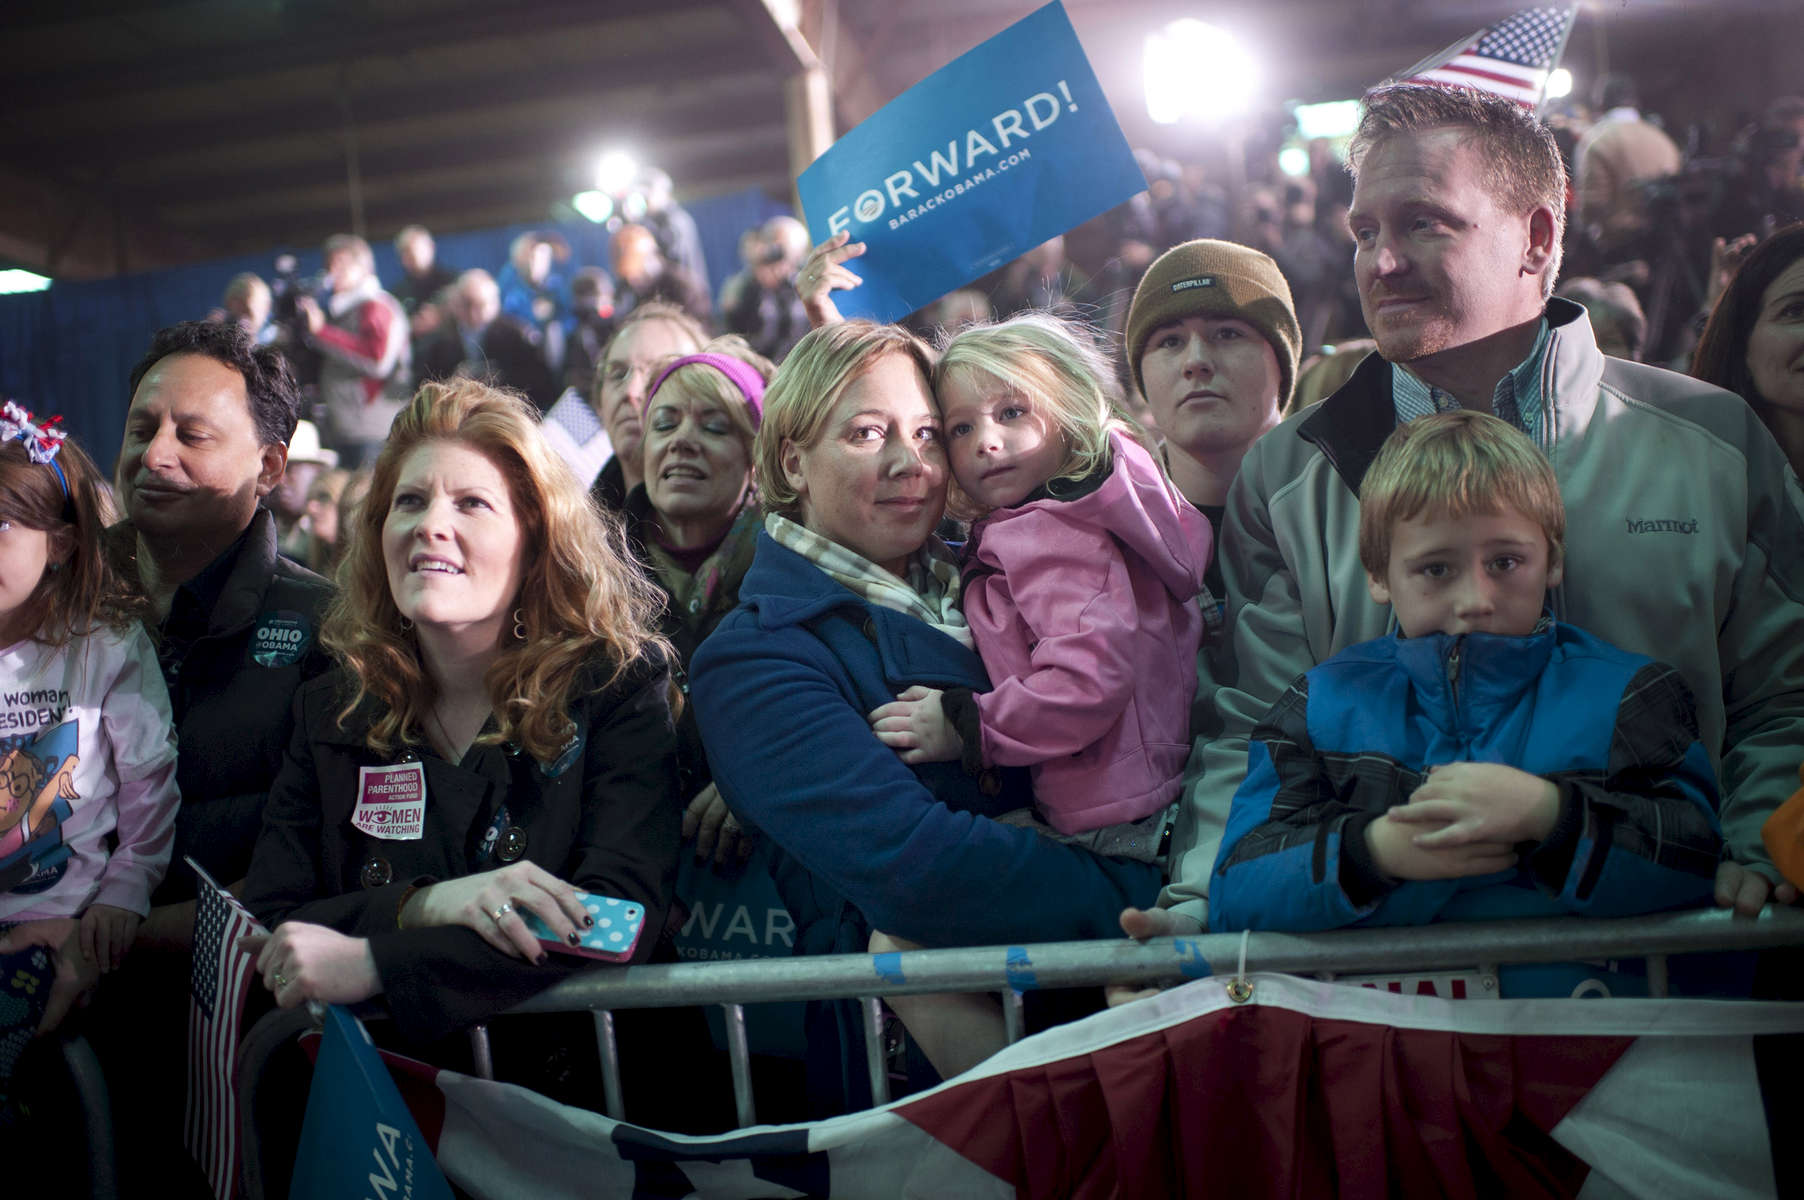 November 2, 2012 - Hilliard, OH: A mother and daughter listen to President Barack Obama speak at a rally in the small town of Hilliard, OH a few days before the 2012 election.  (Scout Tufankjian for Obama for America/Polaris)